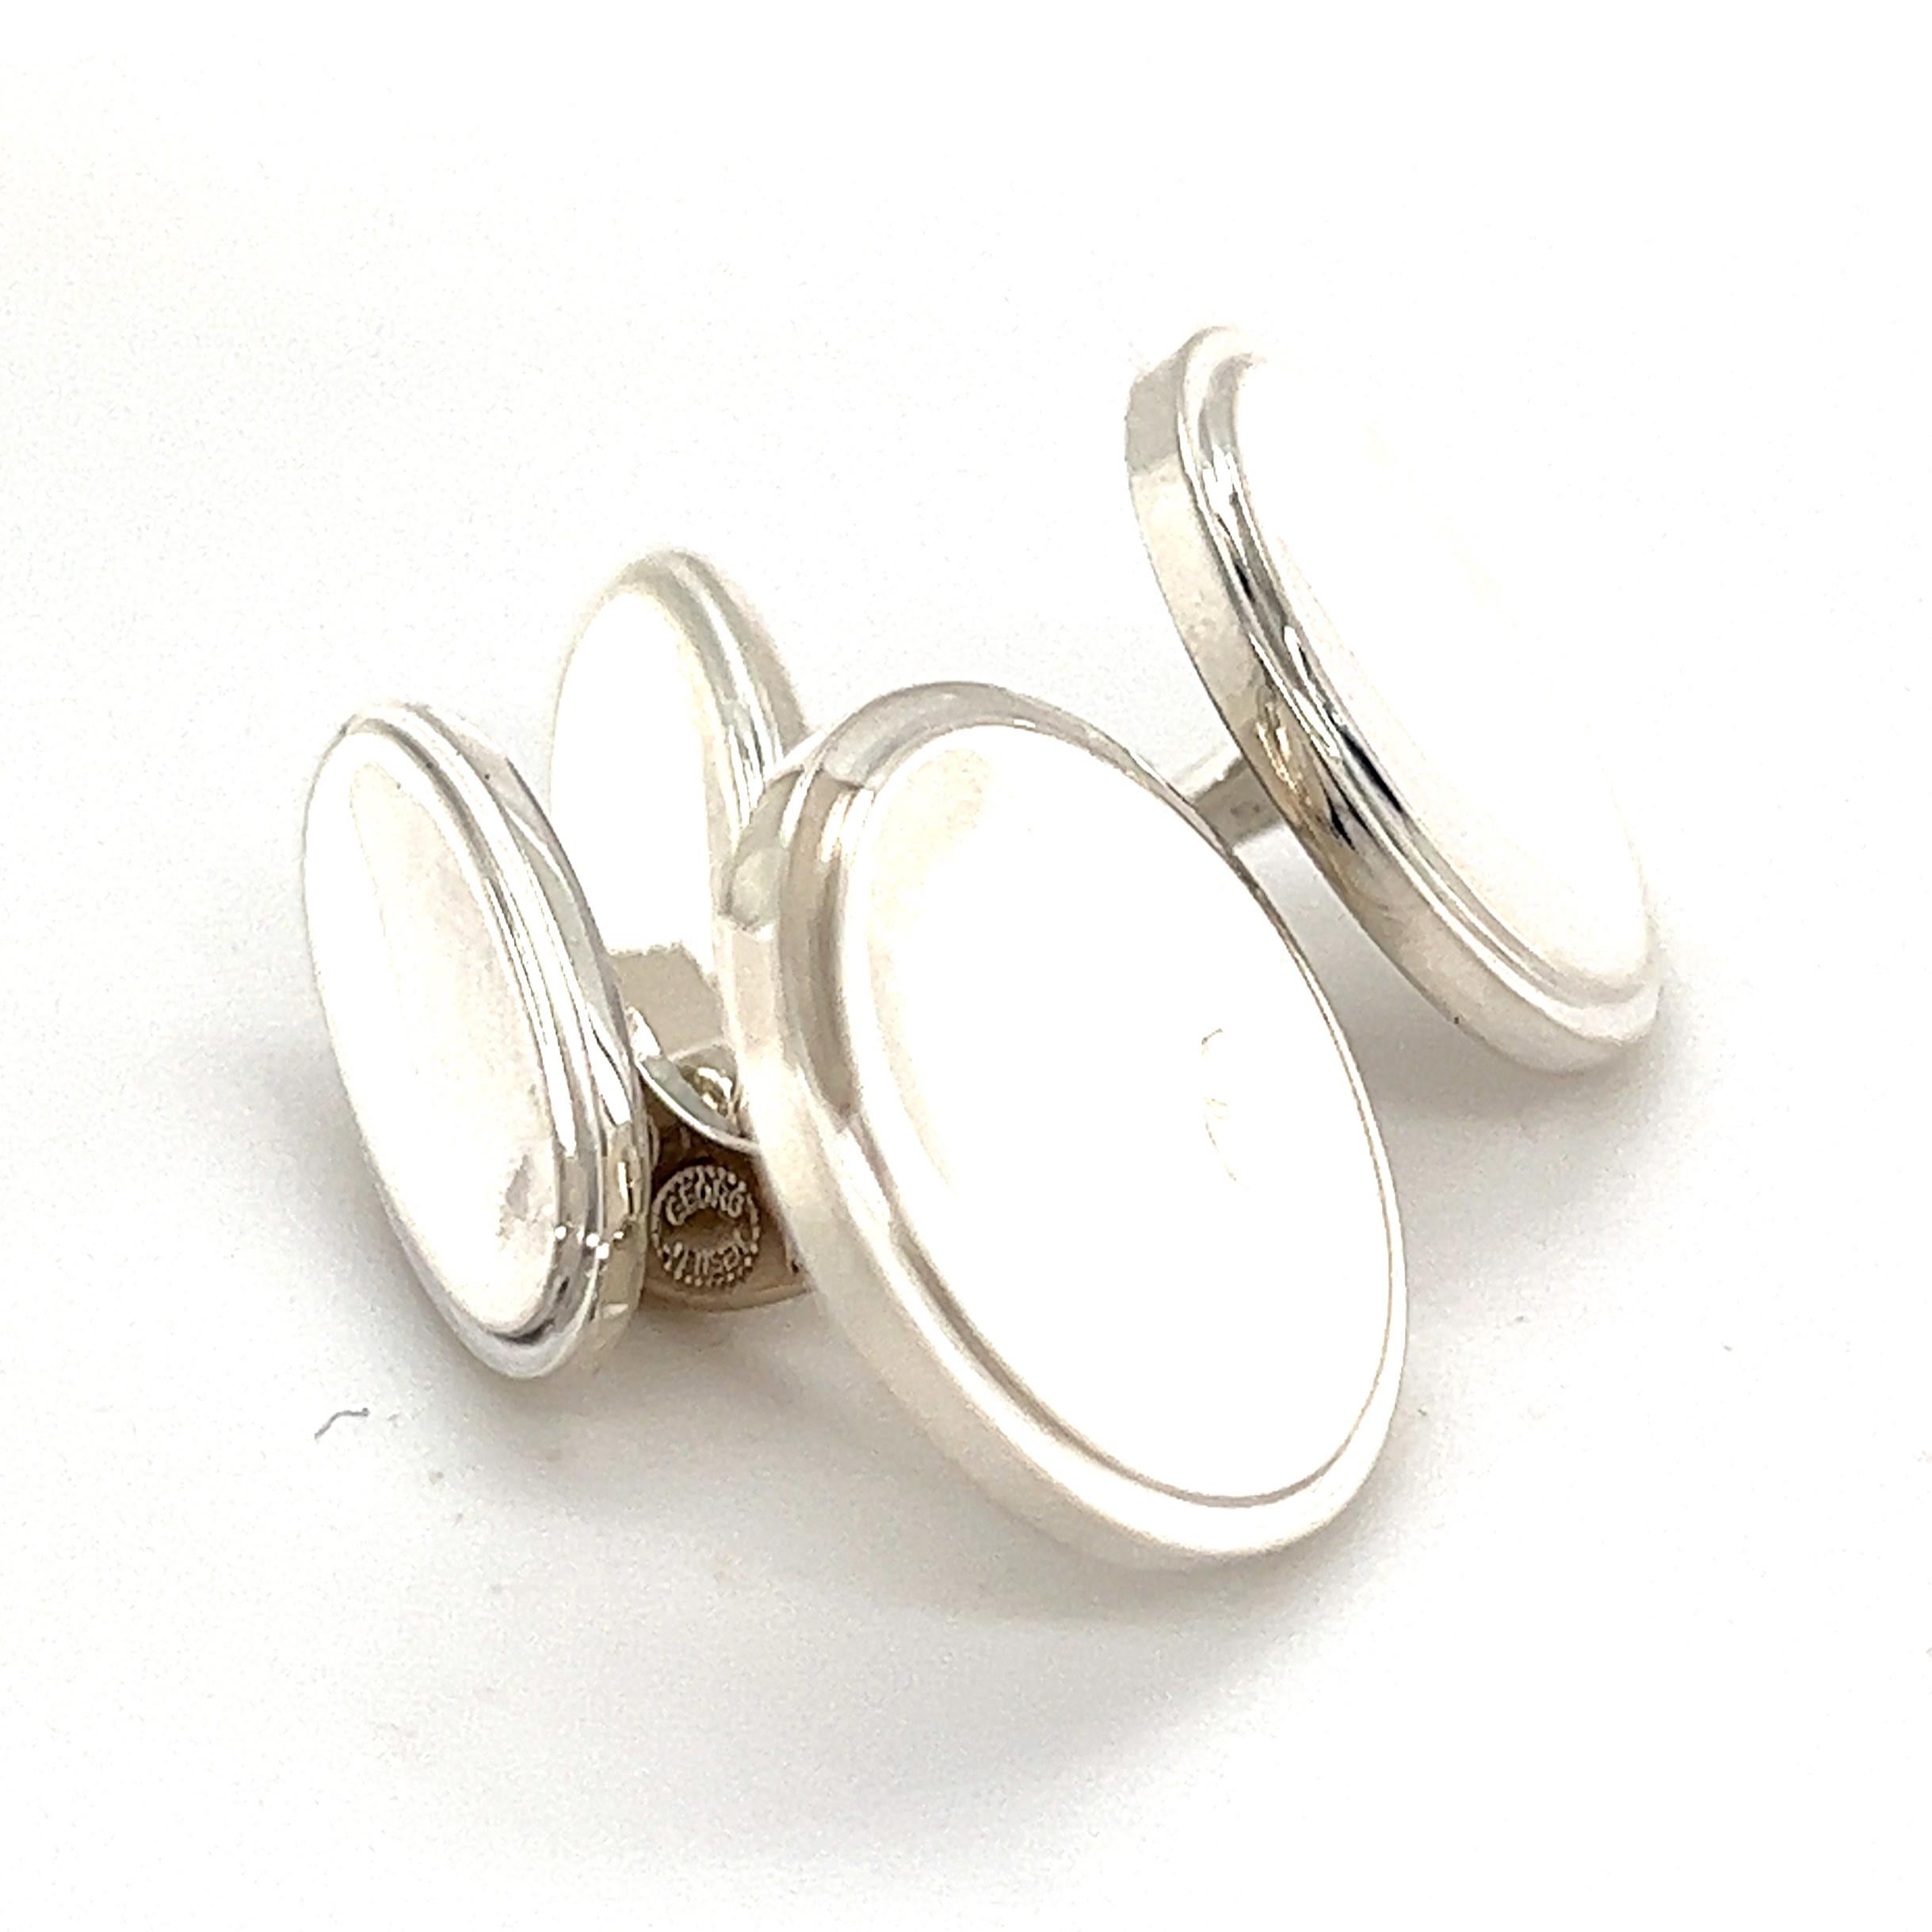 Georg Jensen Estate Sterling Silver Cufflinks 16.84 Grams GJ6

These elegant Authentic Georg Jensen Men's Cufflinks are made of sterling silver and have a weight of 16.84 grams.

TRUSTED SELLER SINCE 2002

PLEASE SEE OUR HUNDREDS OF POSITIVE